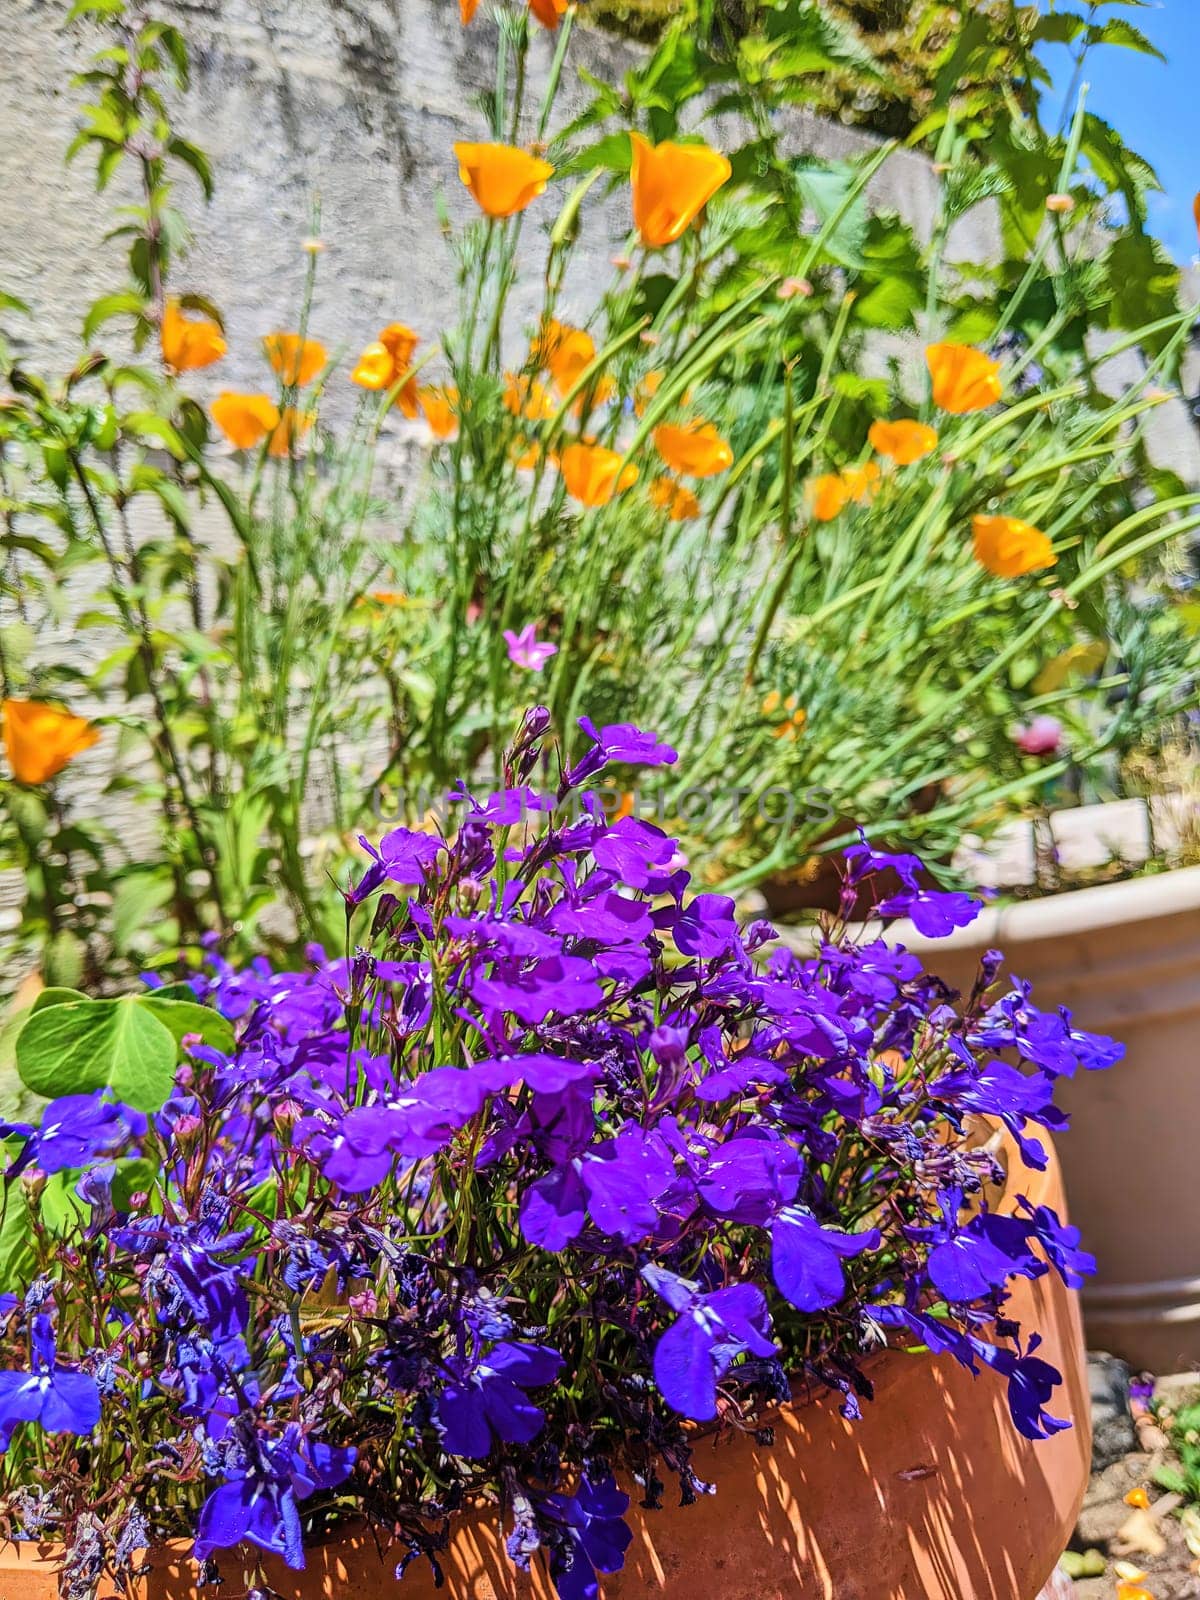 Sunlit patio in San Francisco community garden showcasing a terracotta pot brimming with vibrant purple Lobelia blooms, against a mossy stone wall and orange poppy backdrop, 2023.